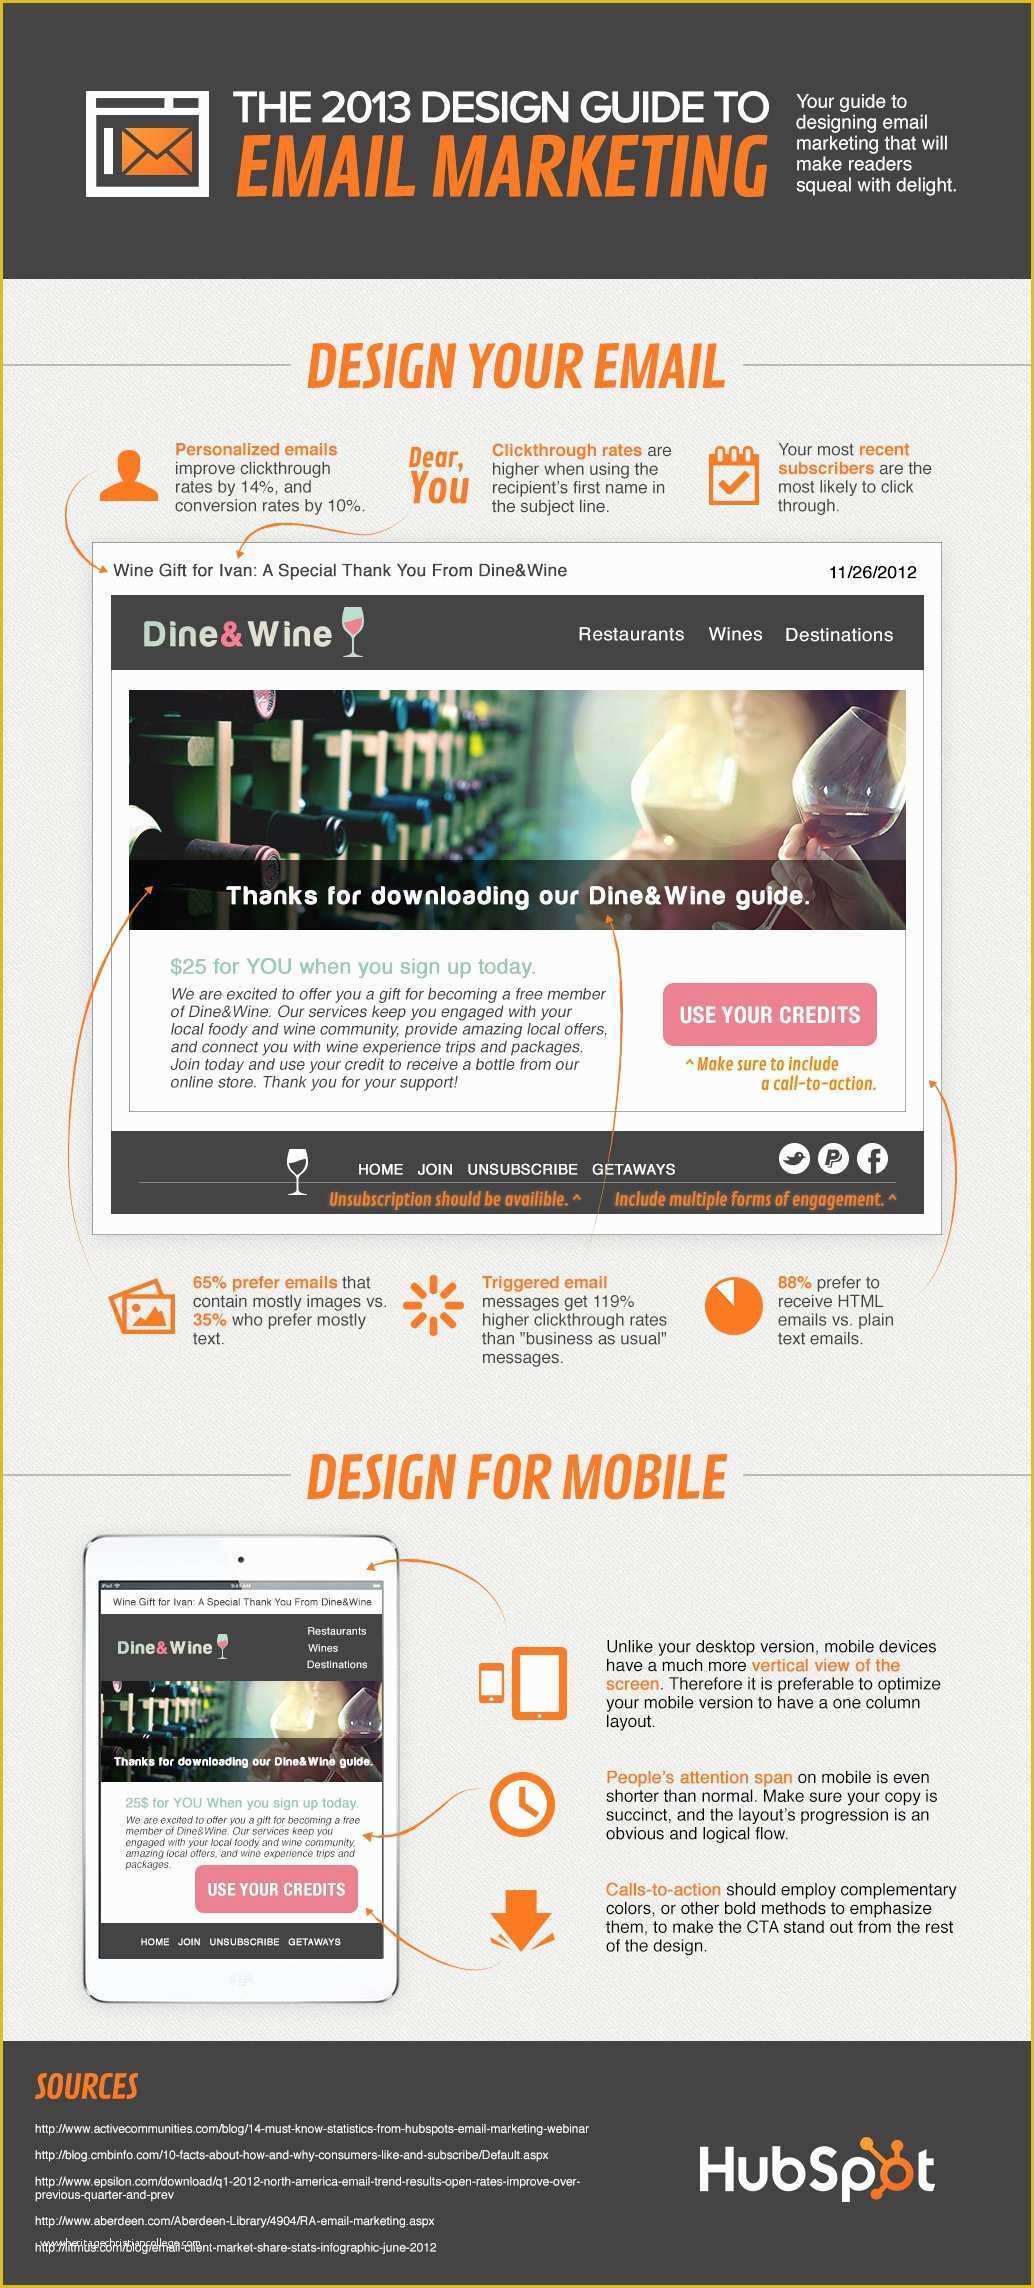 Free Hubspot Templates Of the 2013 Design Guide to Email Marketing [infographic]